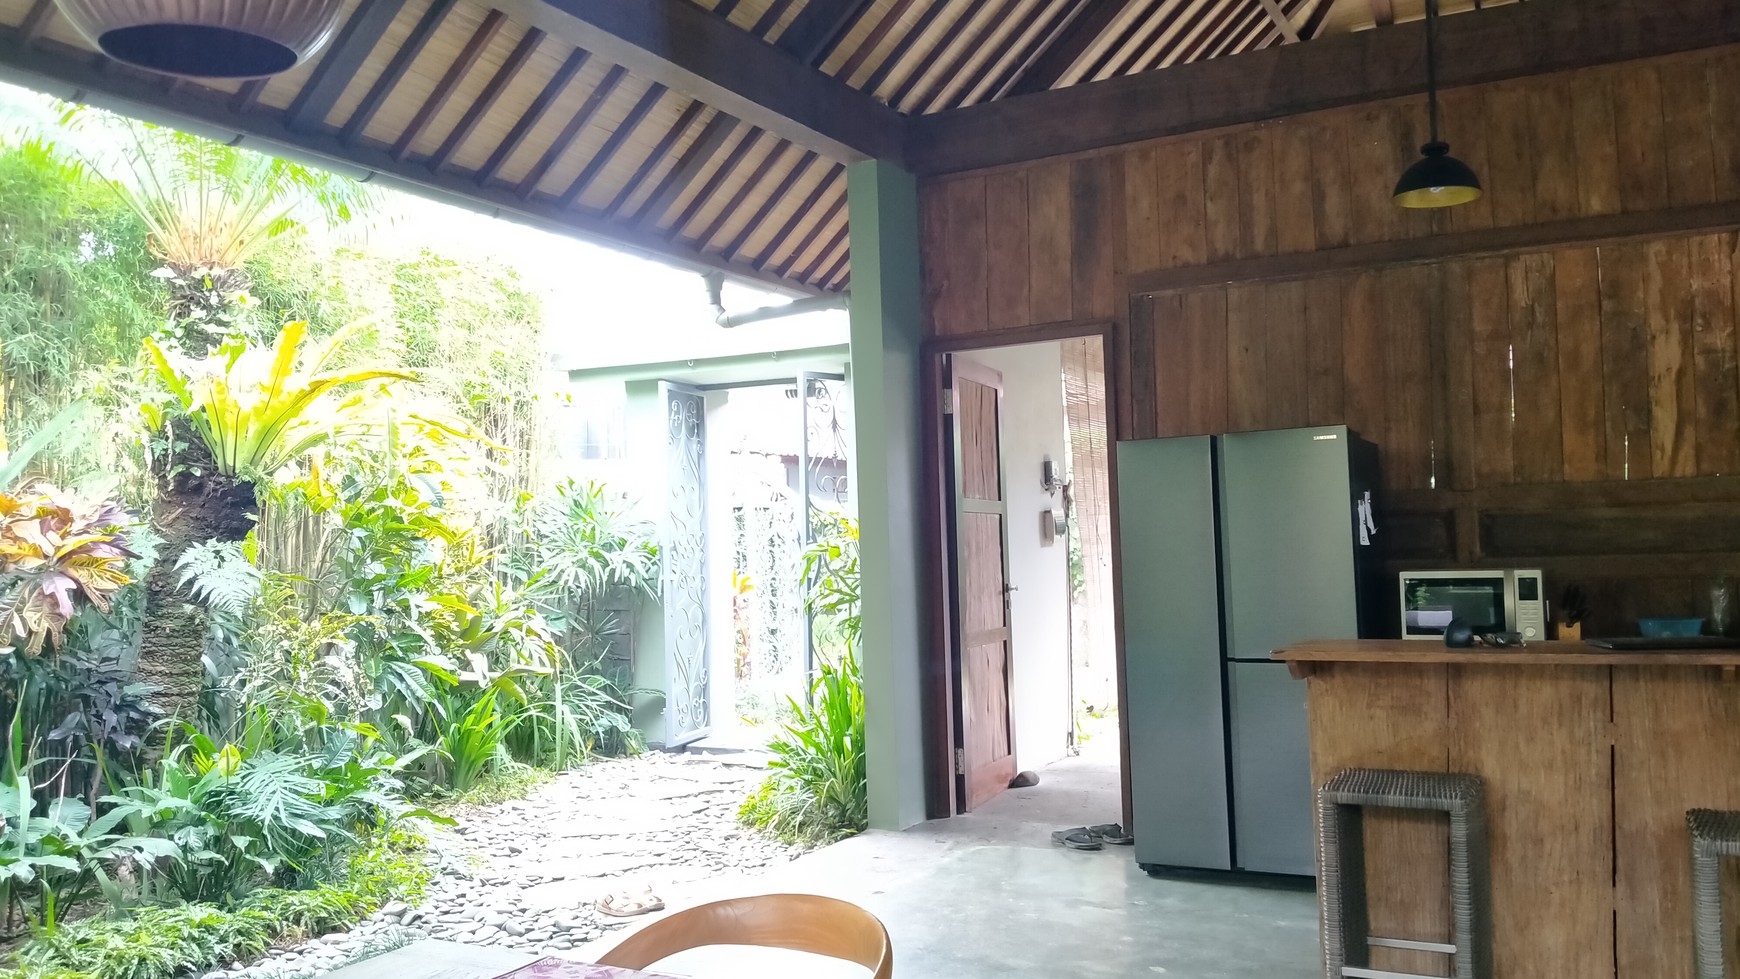 2 Bedroom Leasehold Villa For Sale with Lush Green Views - 10 Minutes From Ubud Center